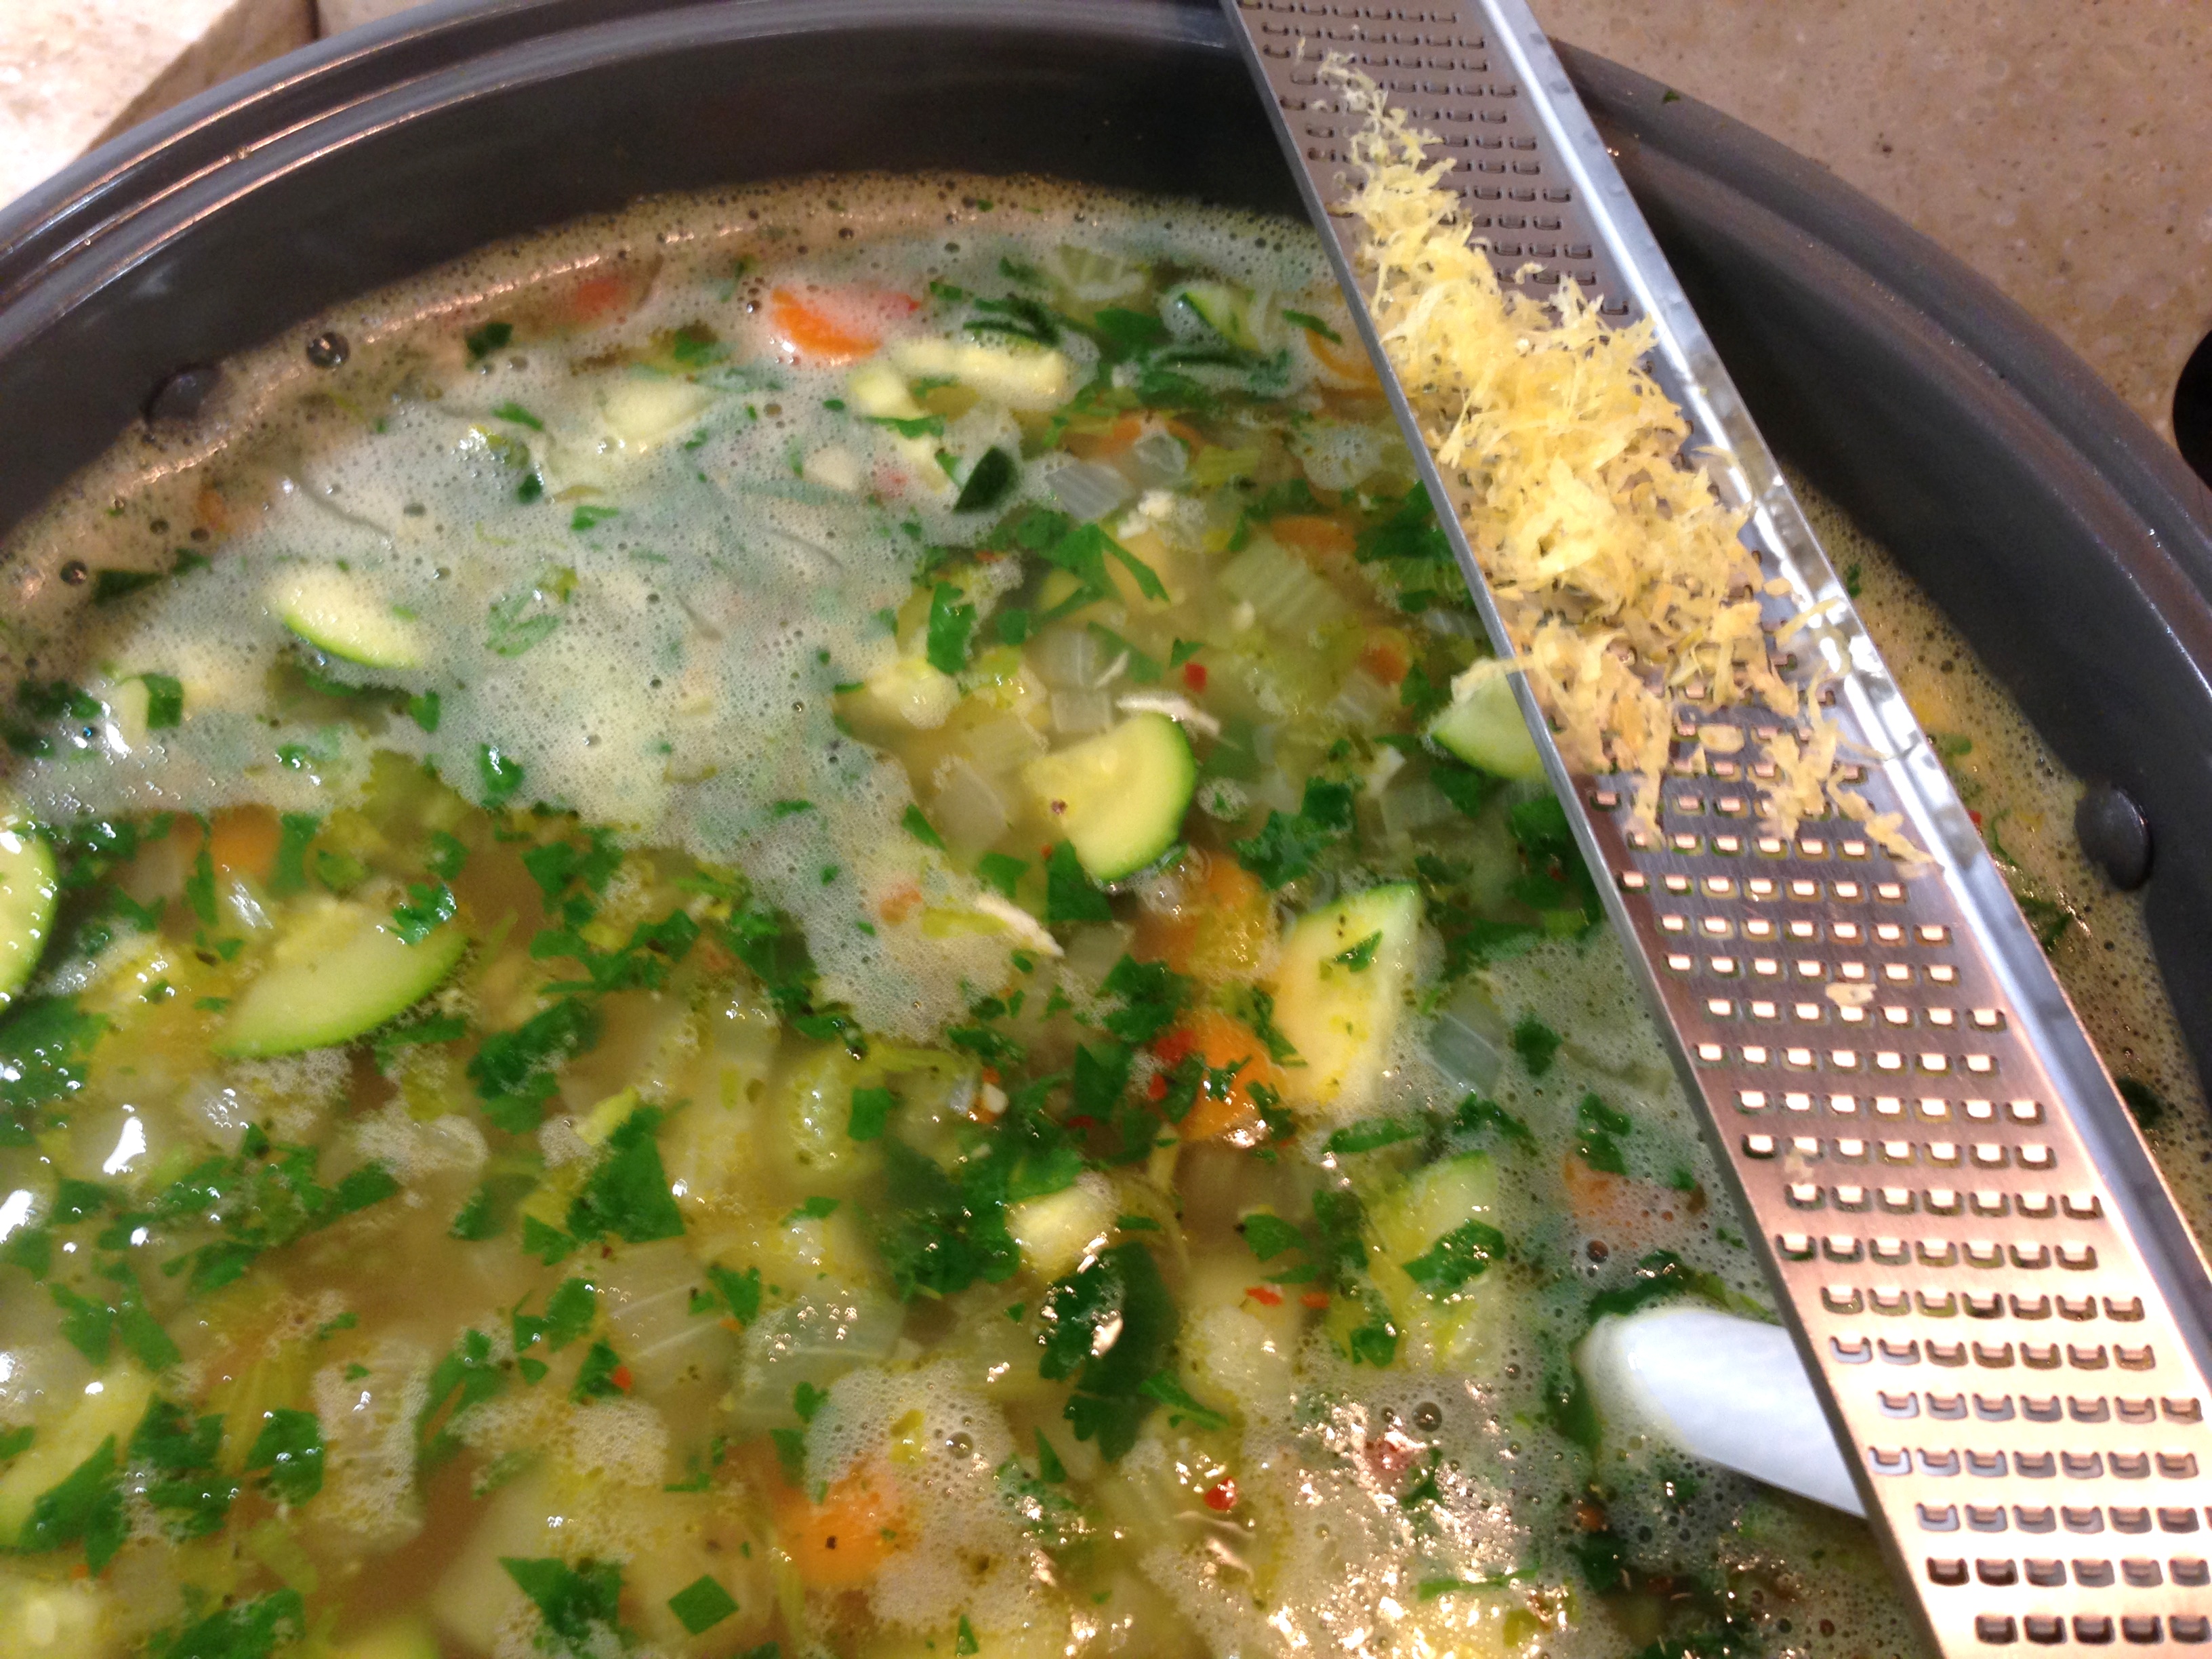 Cilantro and zest to soup